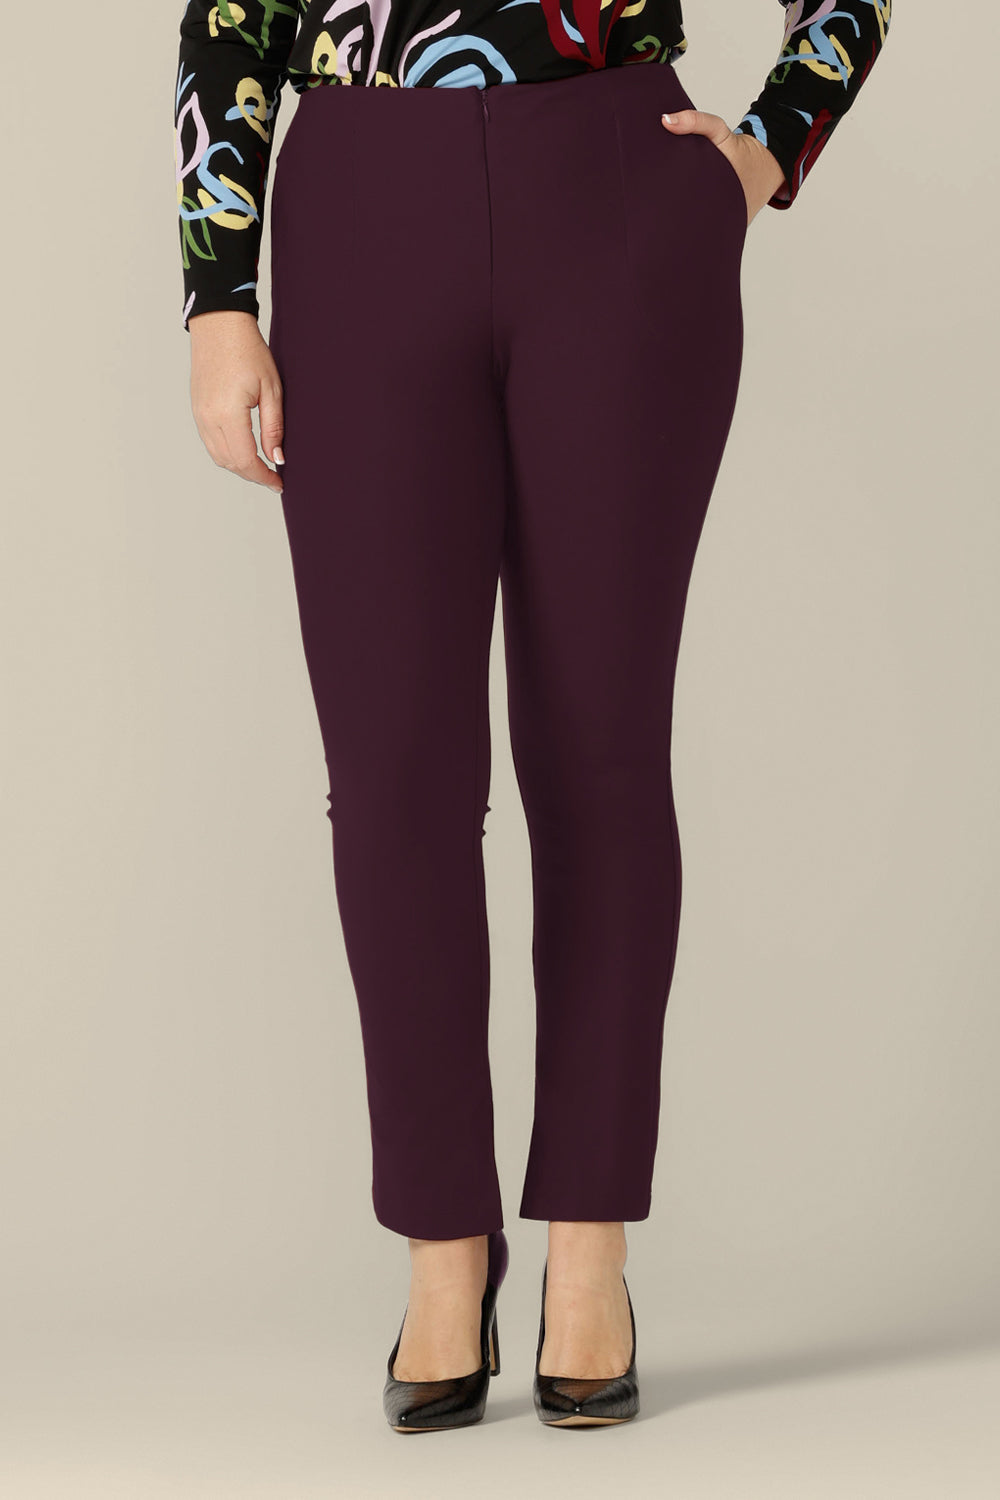 A size 12 woman wears slim leg pants in mulberry ponte jersey by Australia and New Zealand women's clothing brand, L&F. Good pants for work, these comfortable trousers are made for an inclusive size range of sizes 8 to 24.